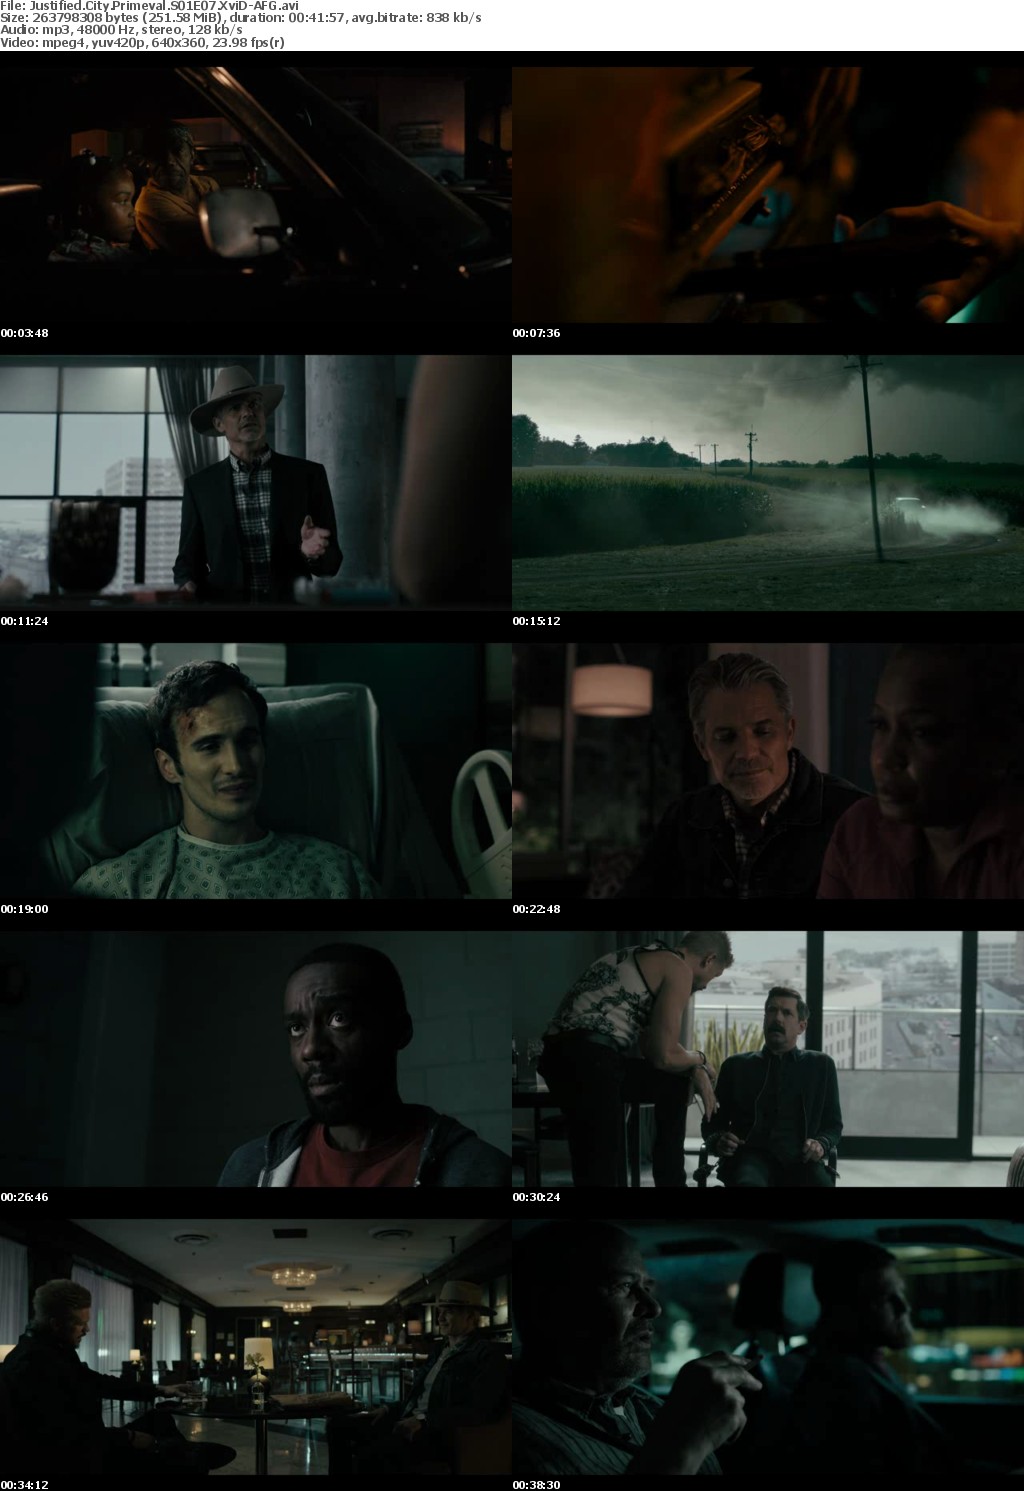 Justified City Primeval S01E07 XviD-AFG